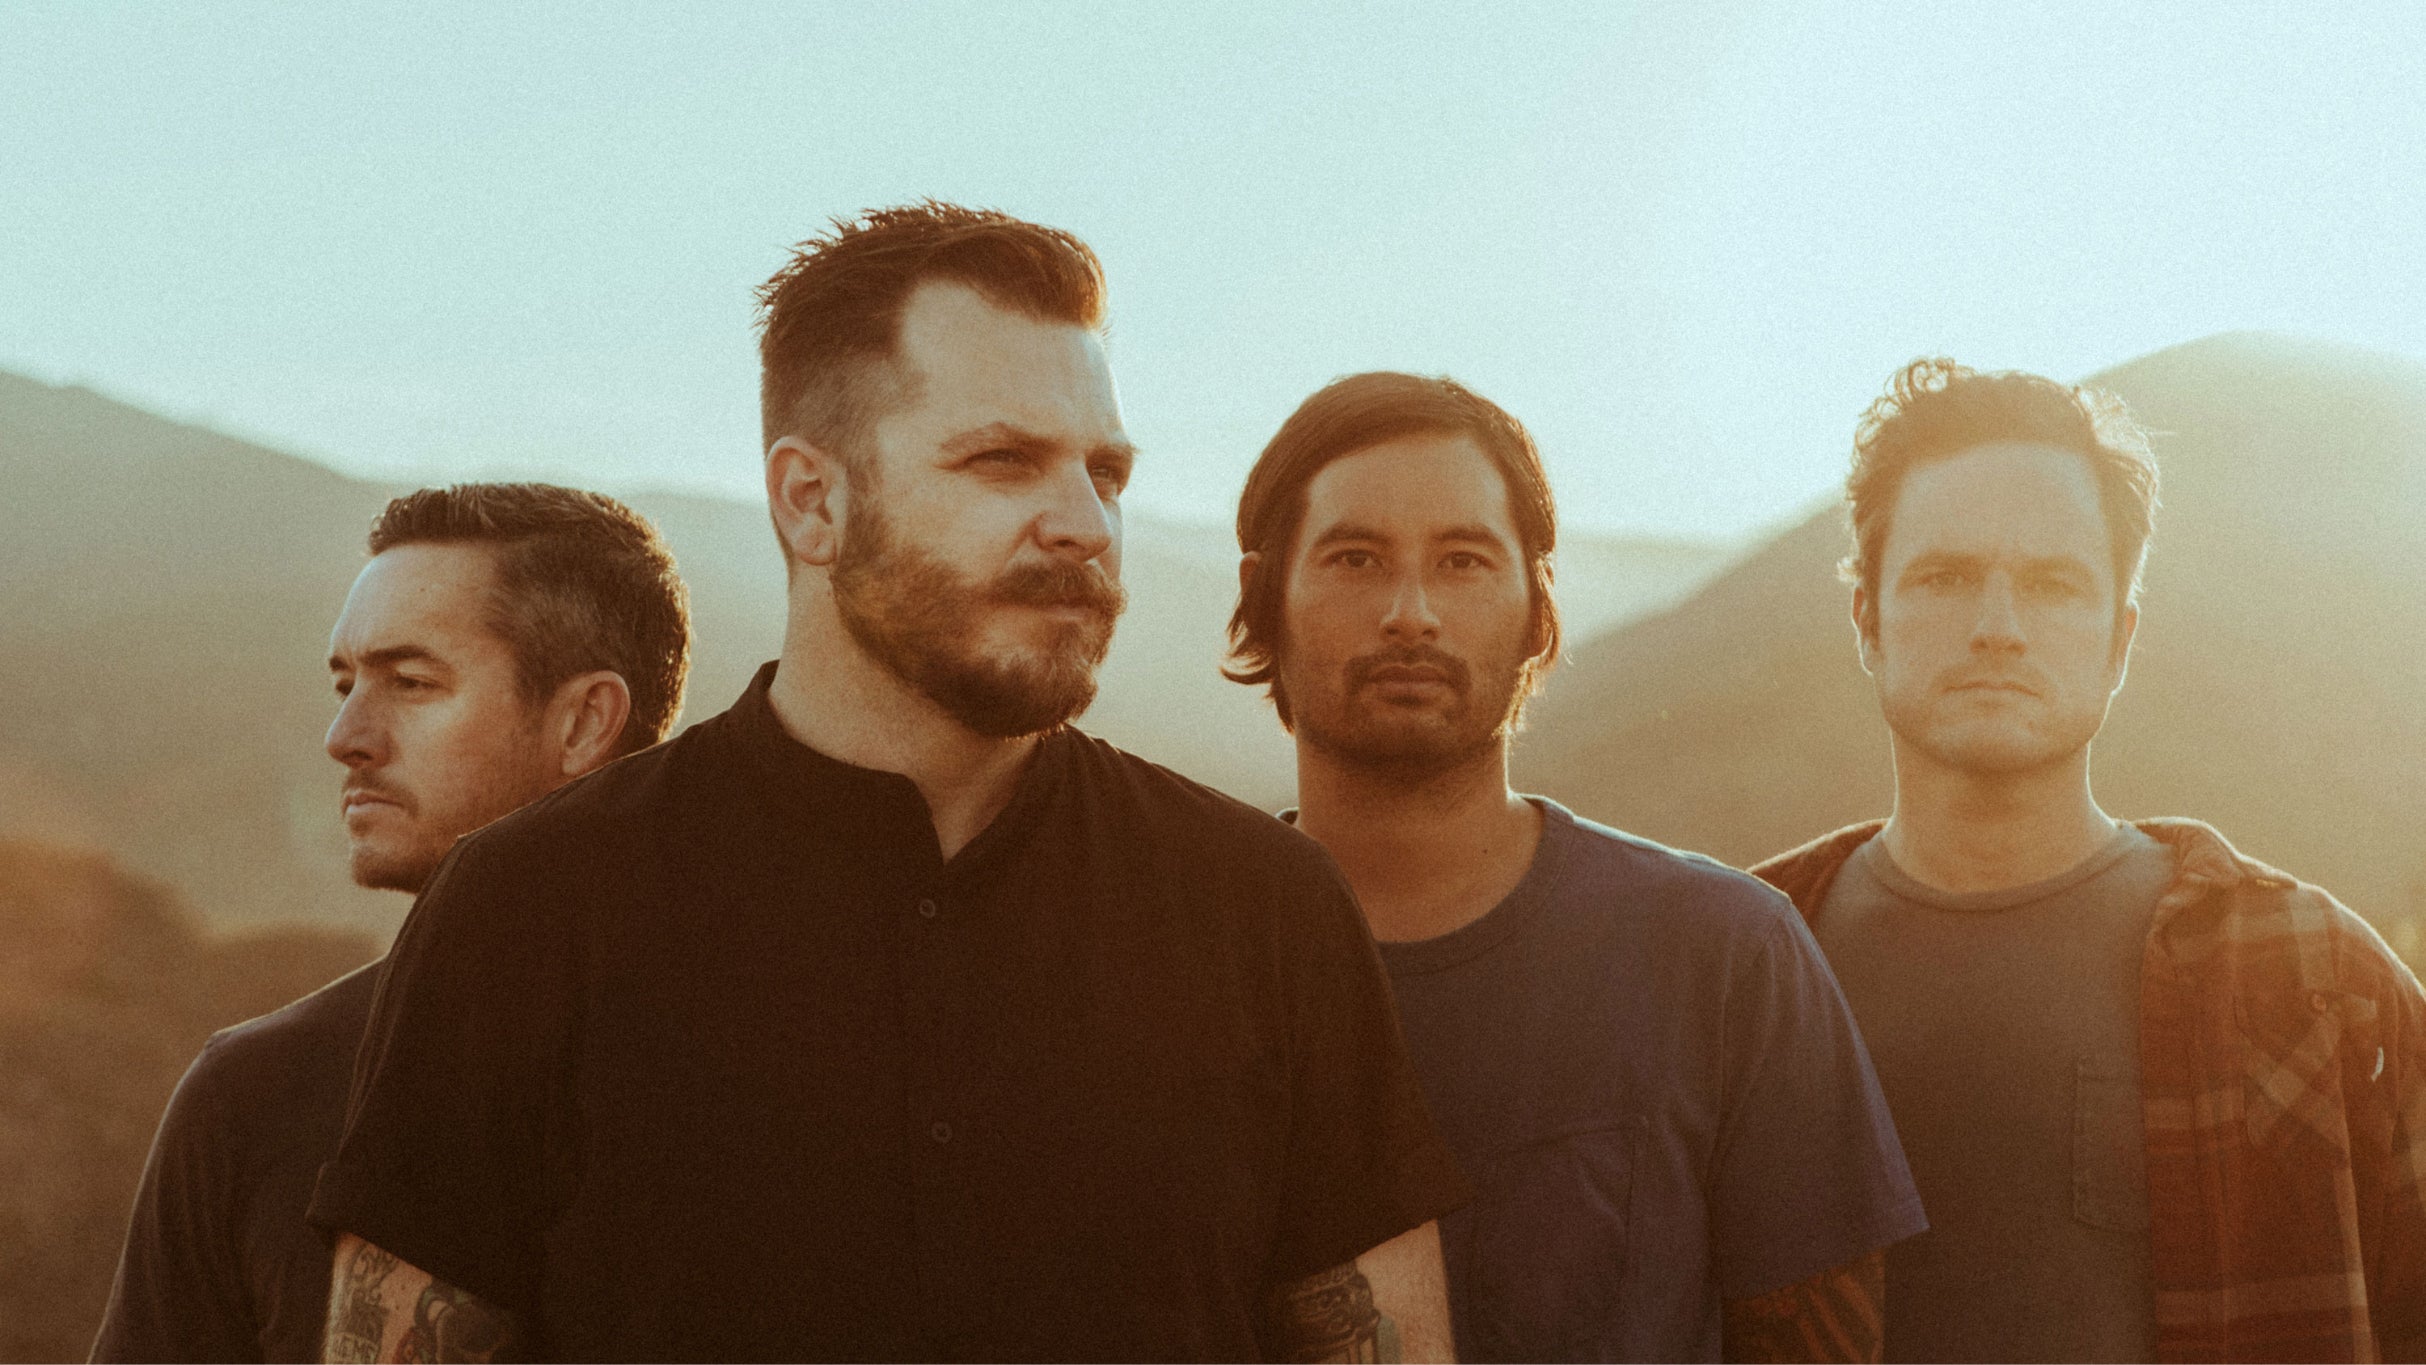 Thrice - The Artist In The Ambulance 20th Anniversary Tour free presale code for event tickets in Los Angeles, CA (The Wiltern)